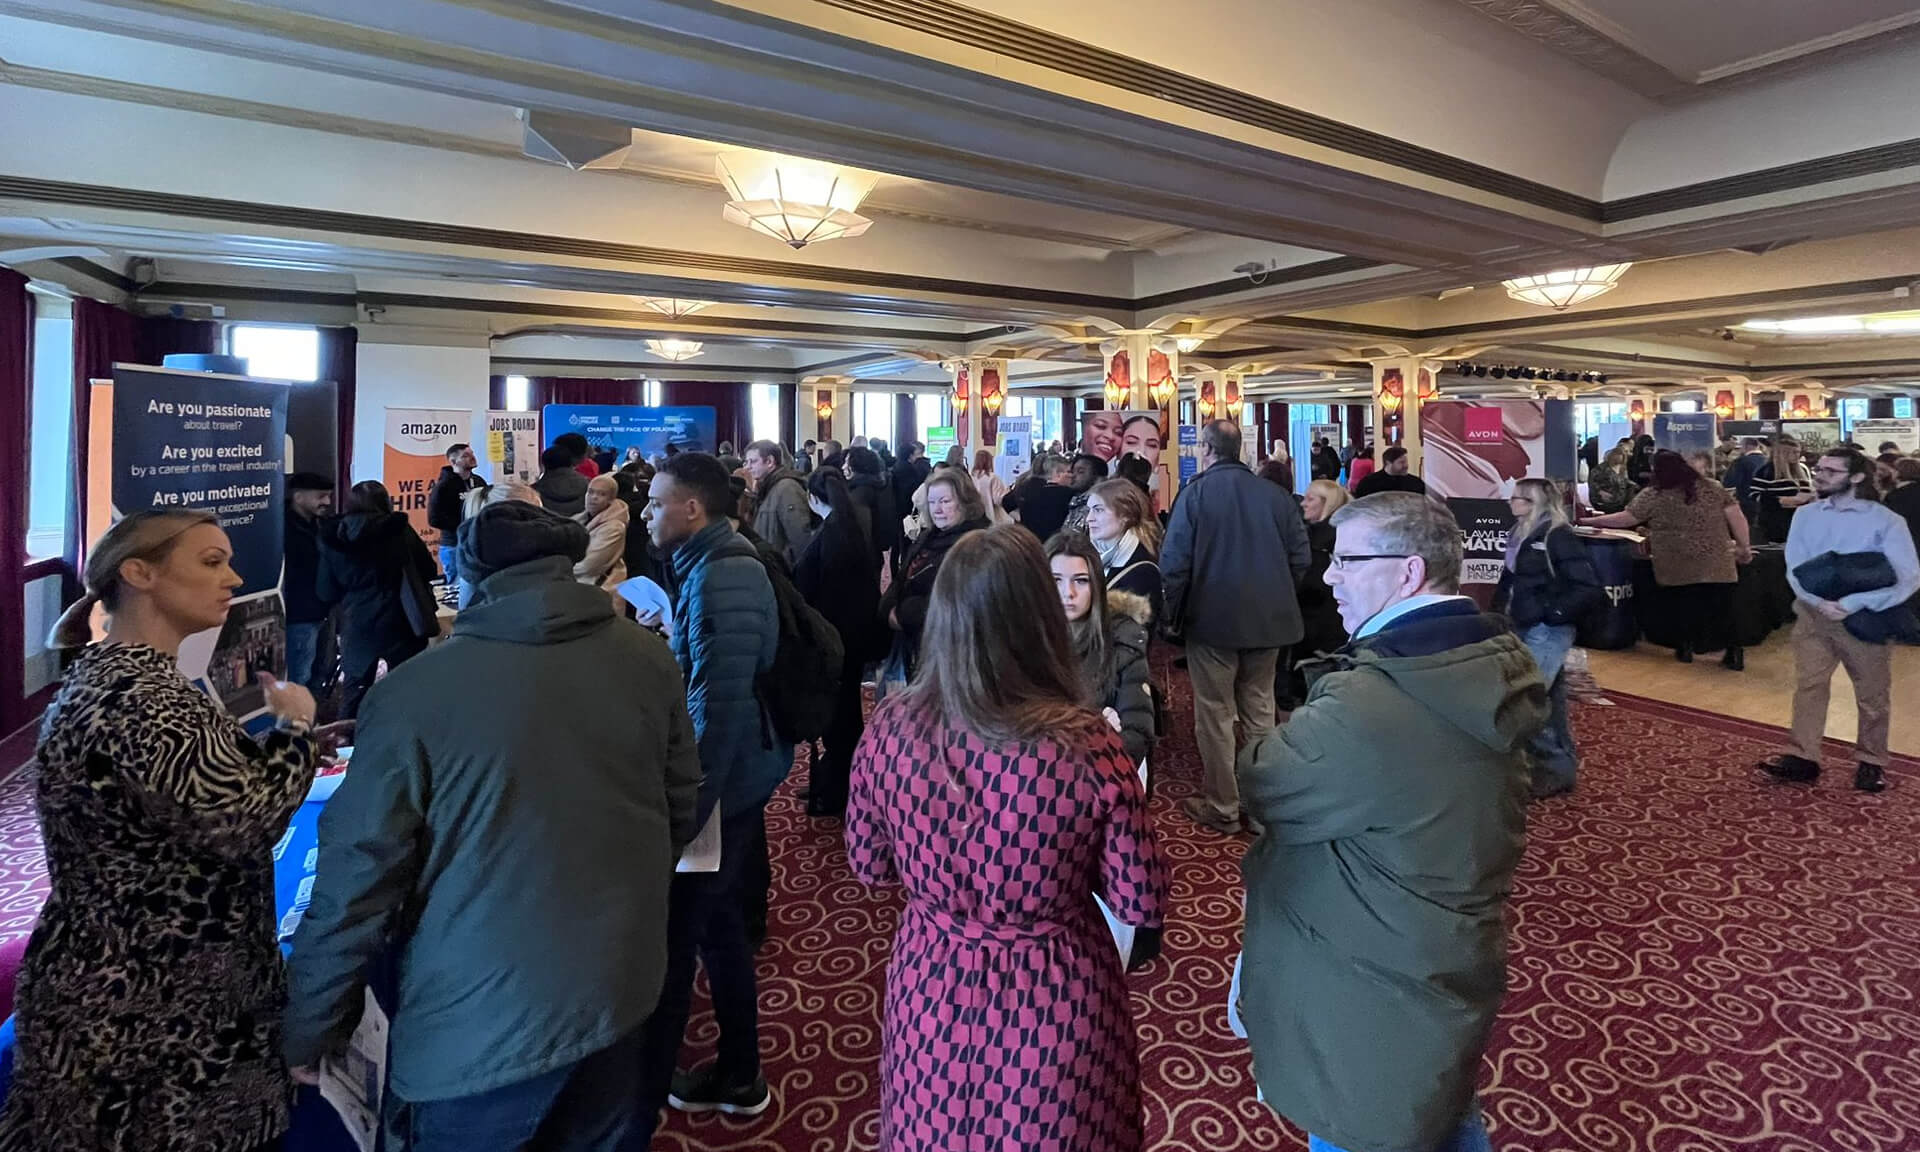 Bournemouth Jobs Fair in action